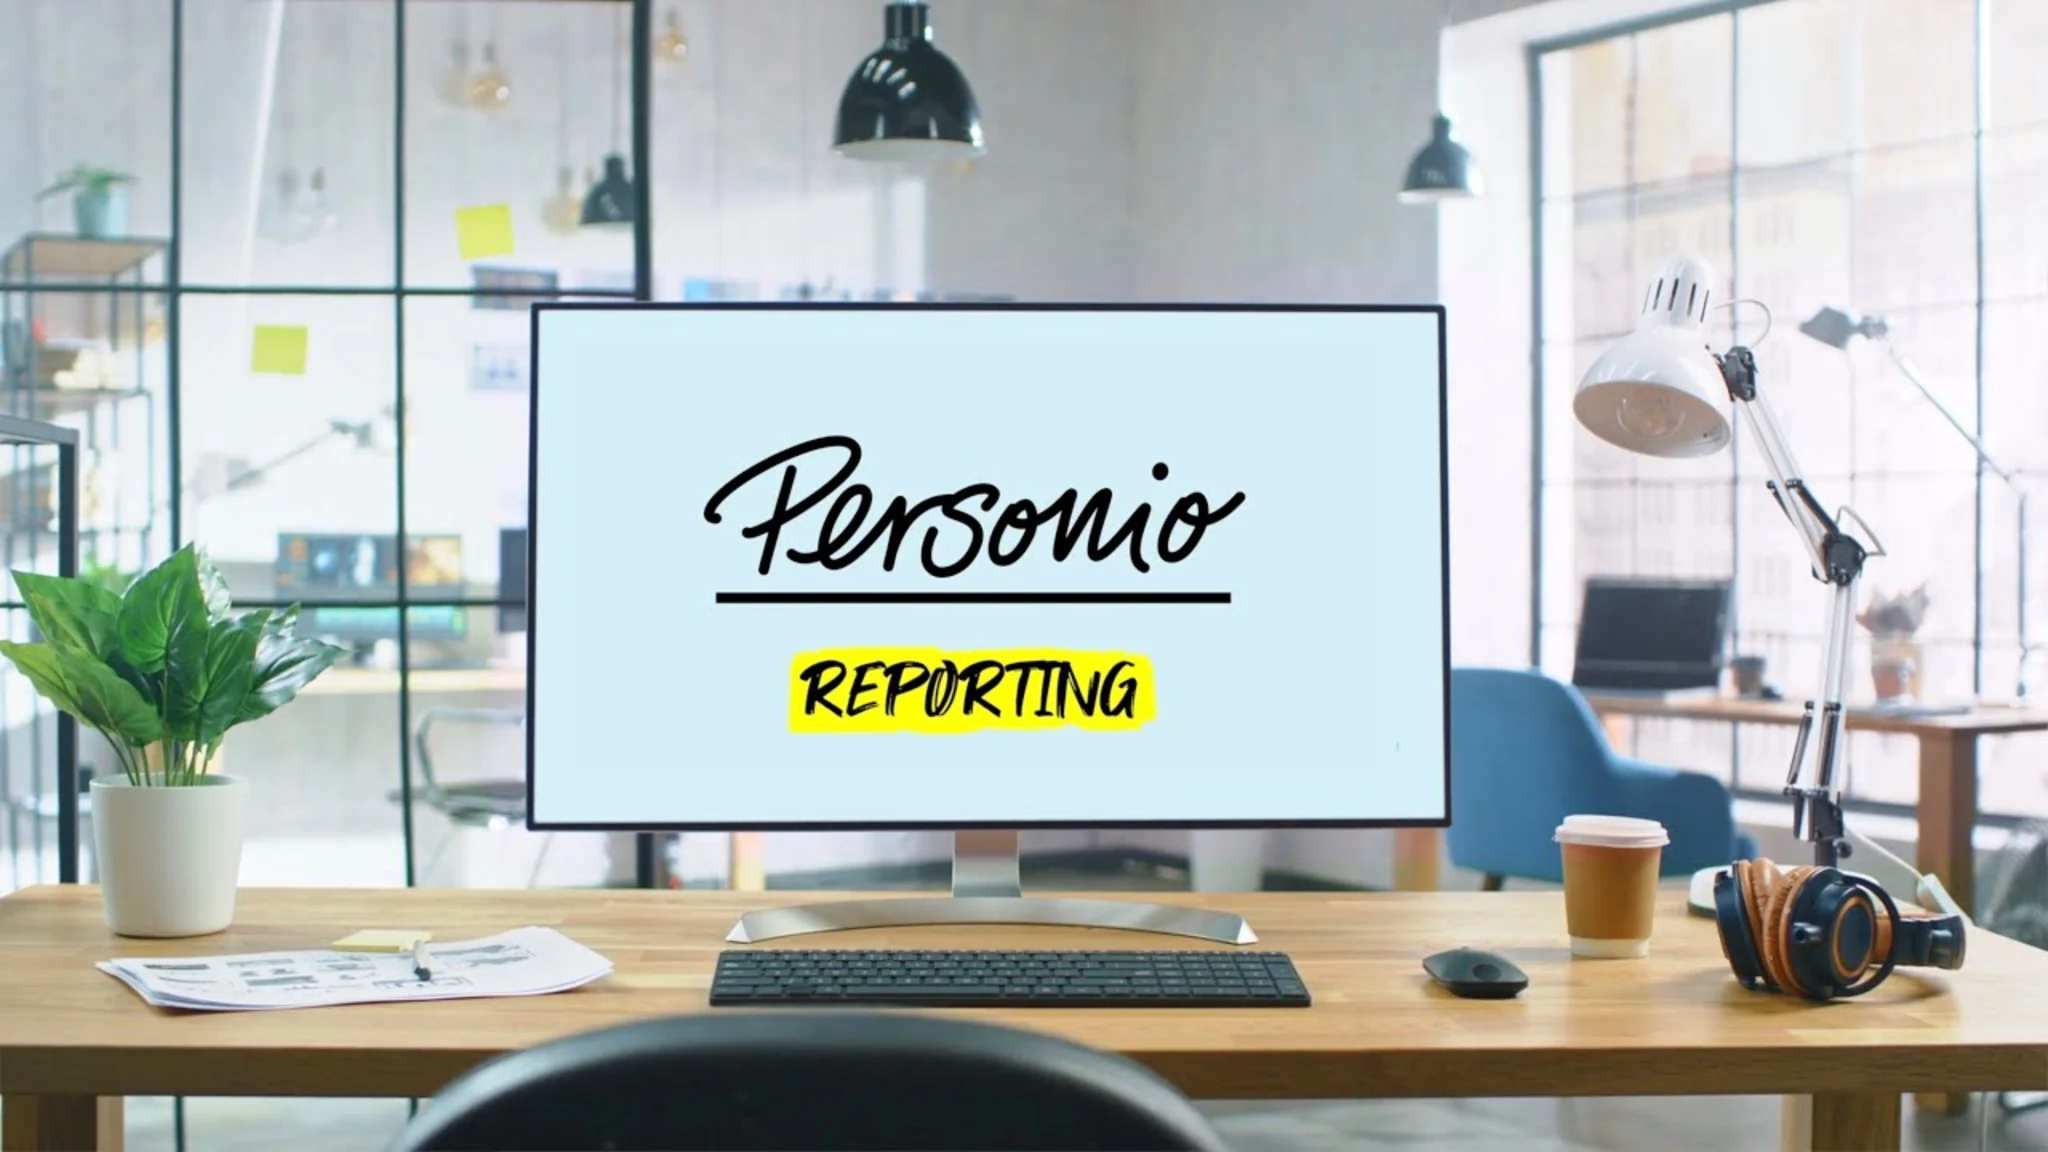 Video Preview: Product Reporting